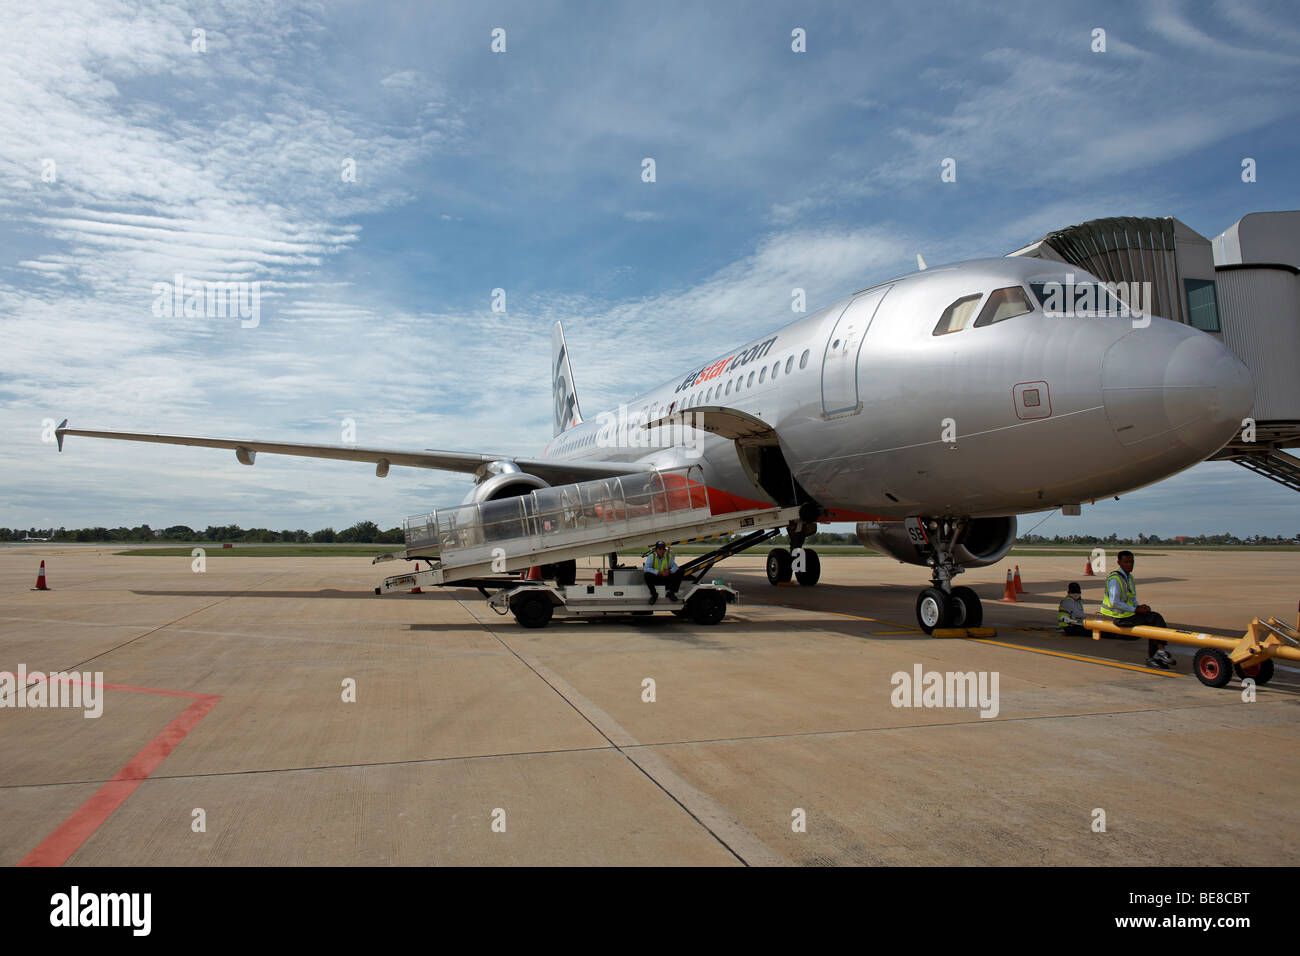 Airbus 320 Australian airline  airplane at Siem Reap Cambodia S. E. Asia Stock Photo